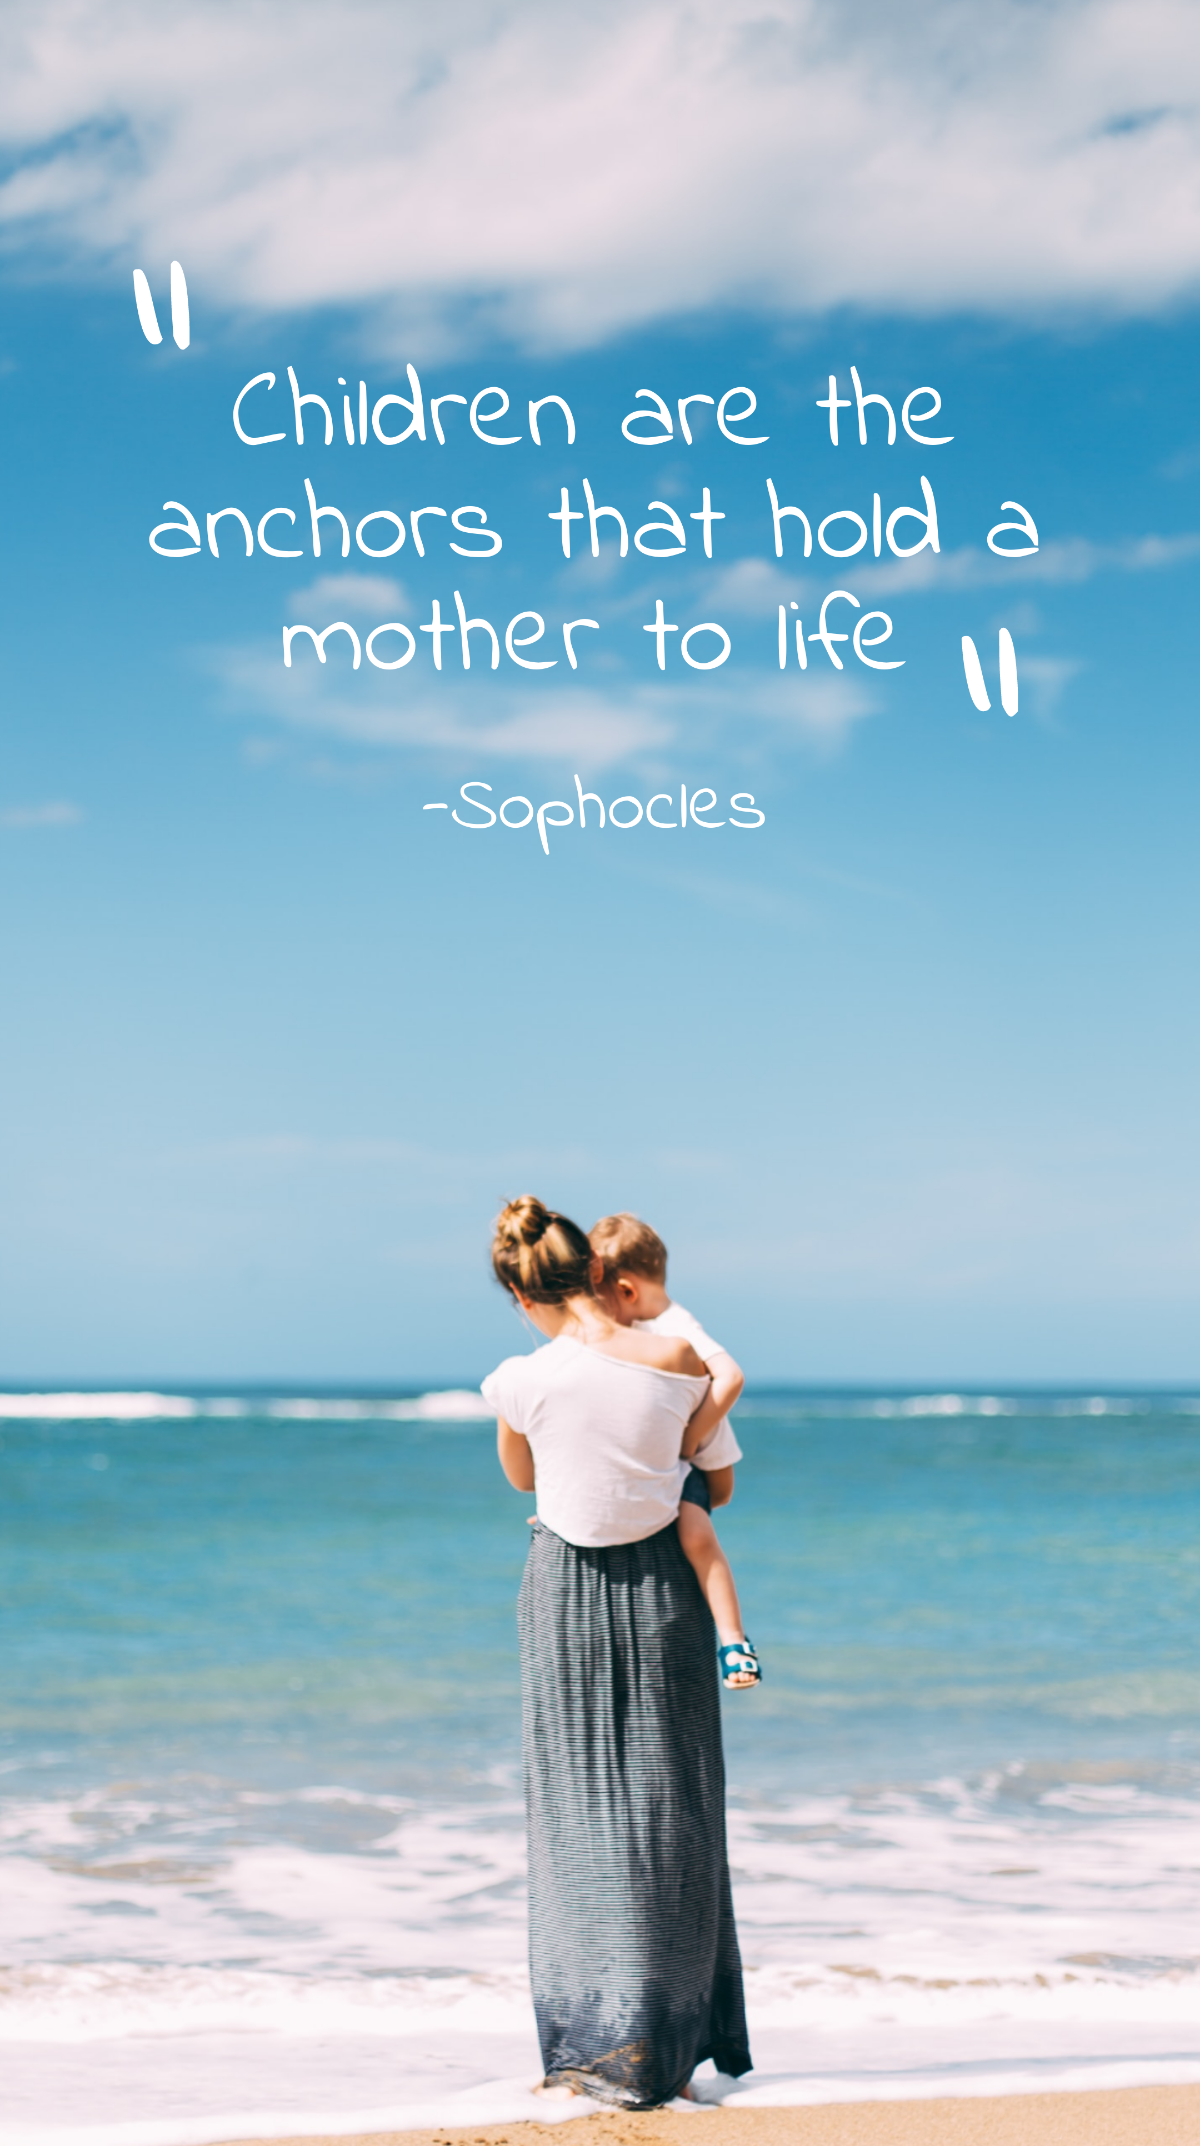 Sophocles - Children are the anchors that hold a mother to life.  Template